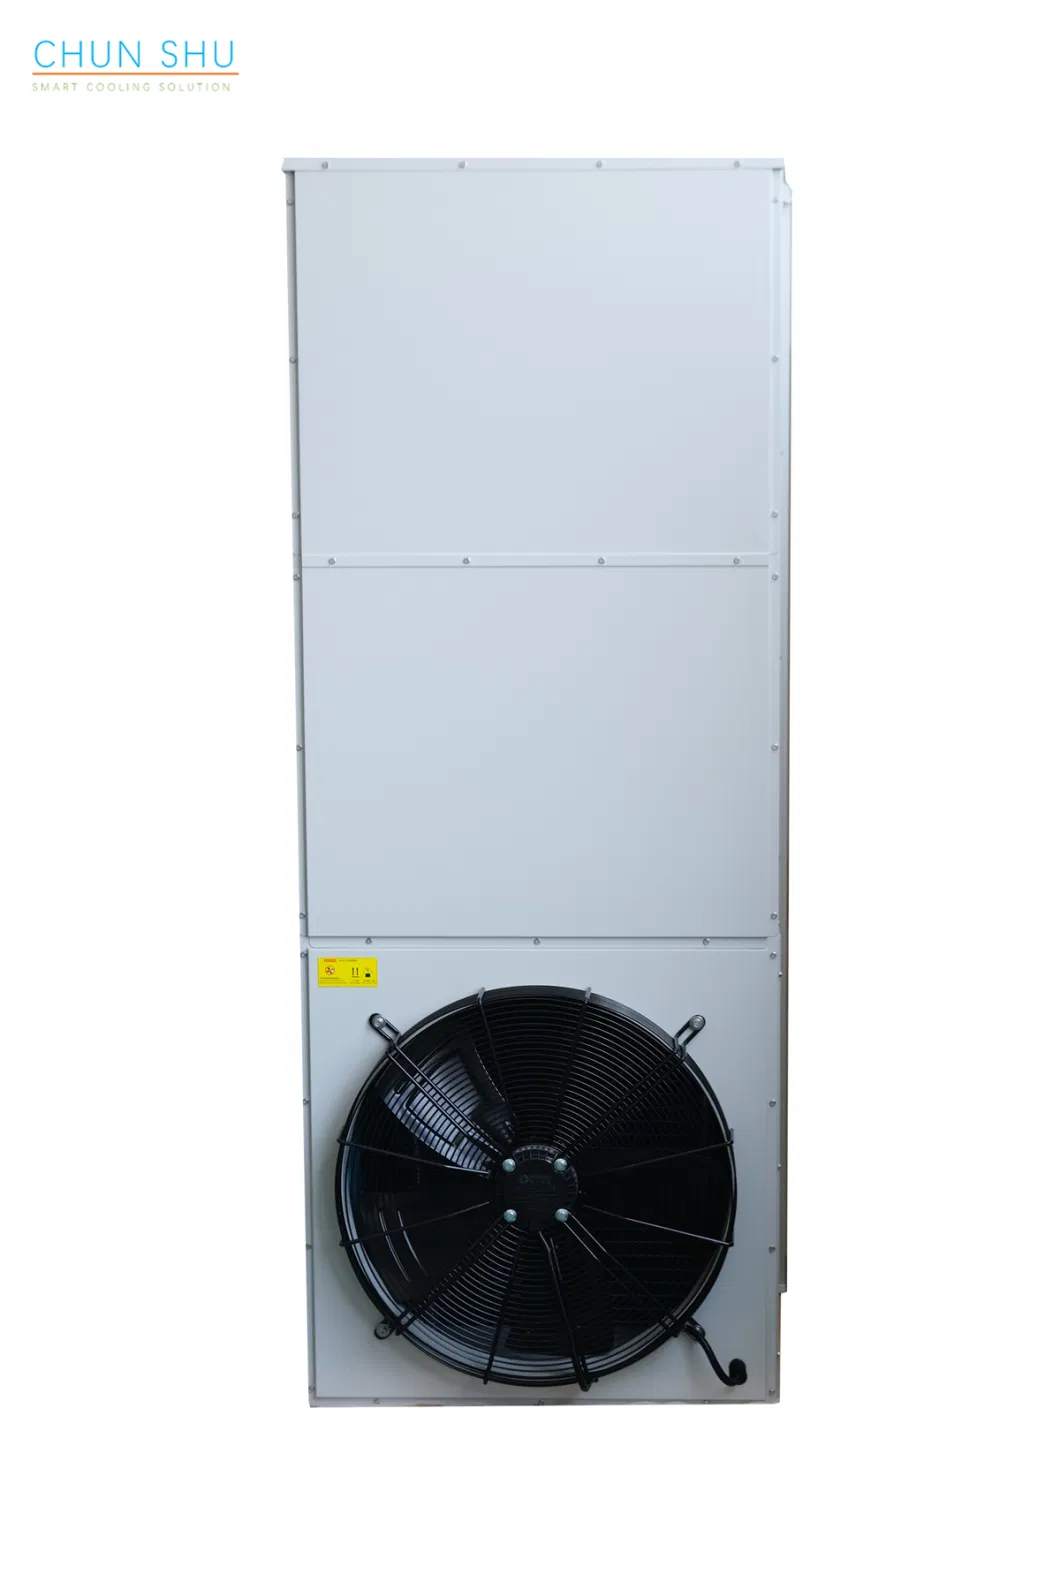 Intelligent Wall-Mounted Upflow Air Conditioner for It Room, Telecom, Shelter